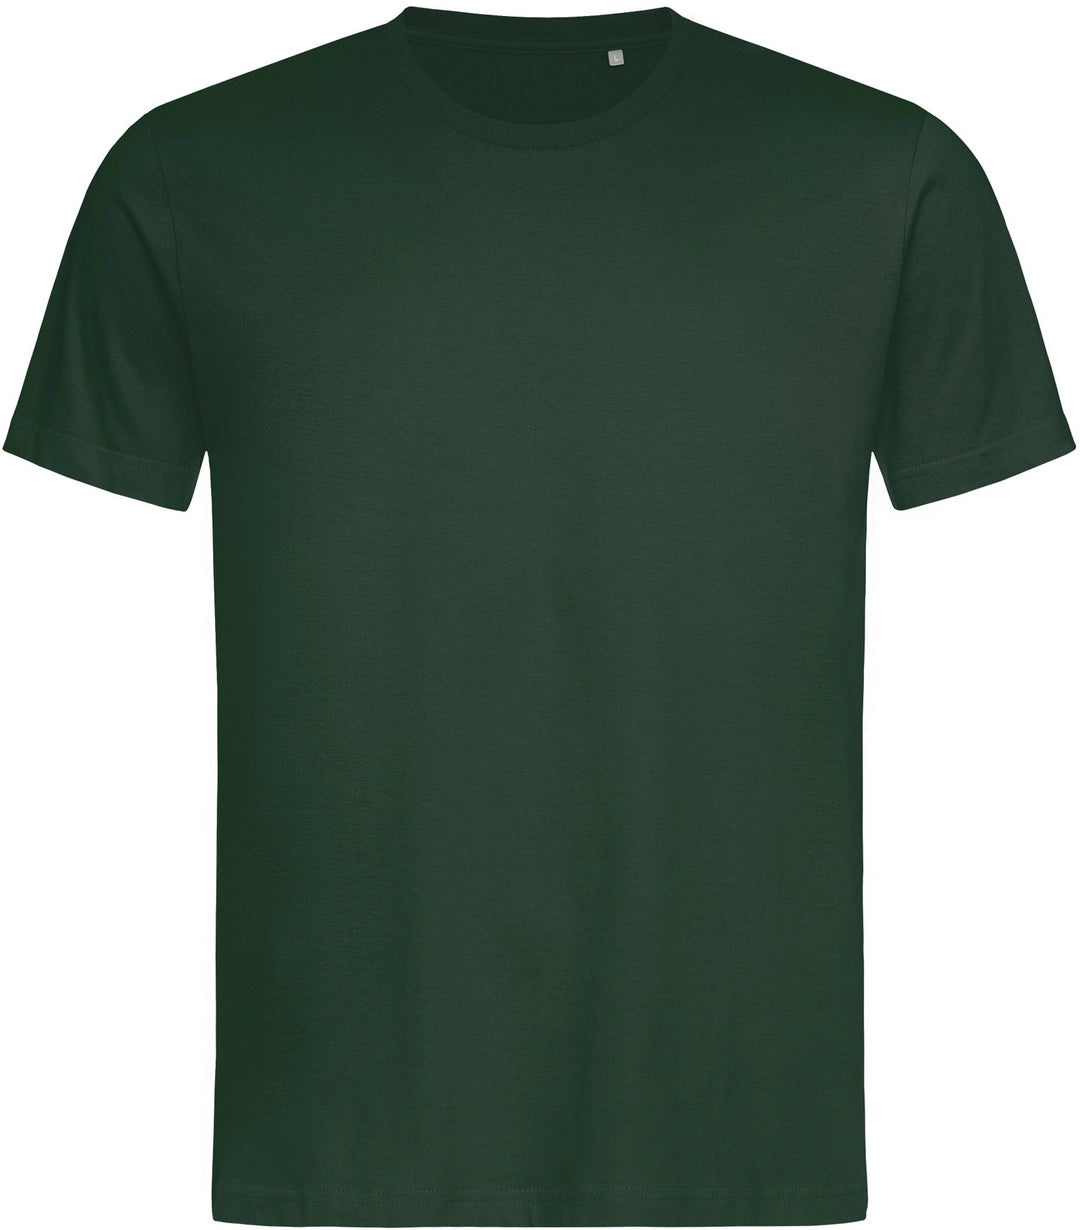 Stedman ST7000 Adult Lux Combed Ringspun T-Shirt - COOZO